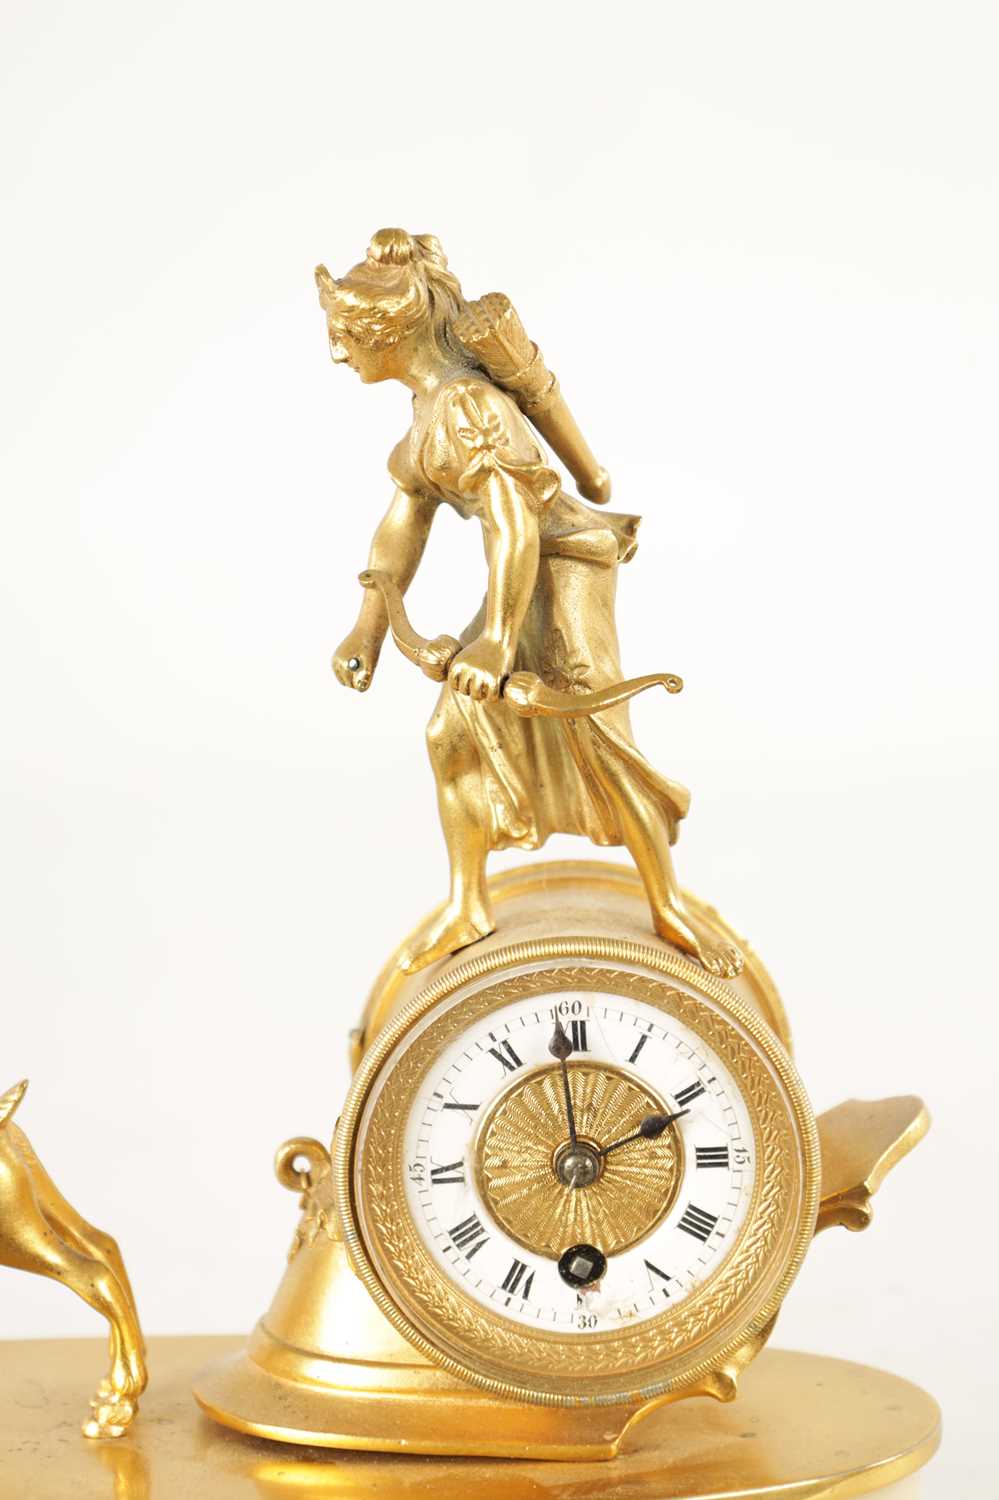 A LATE 19TH CENTURY FRENCH ORMOLU AND MARBLE MANTEL CLOCK - Image 3 of 8